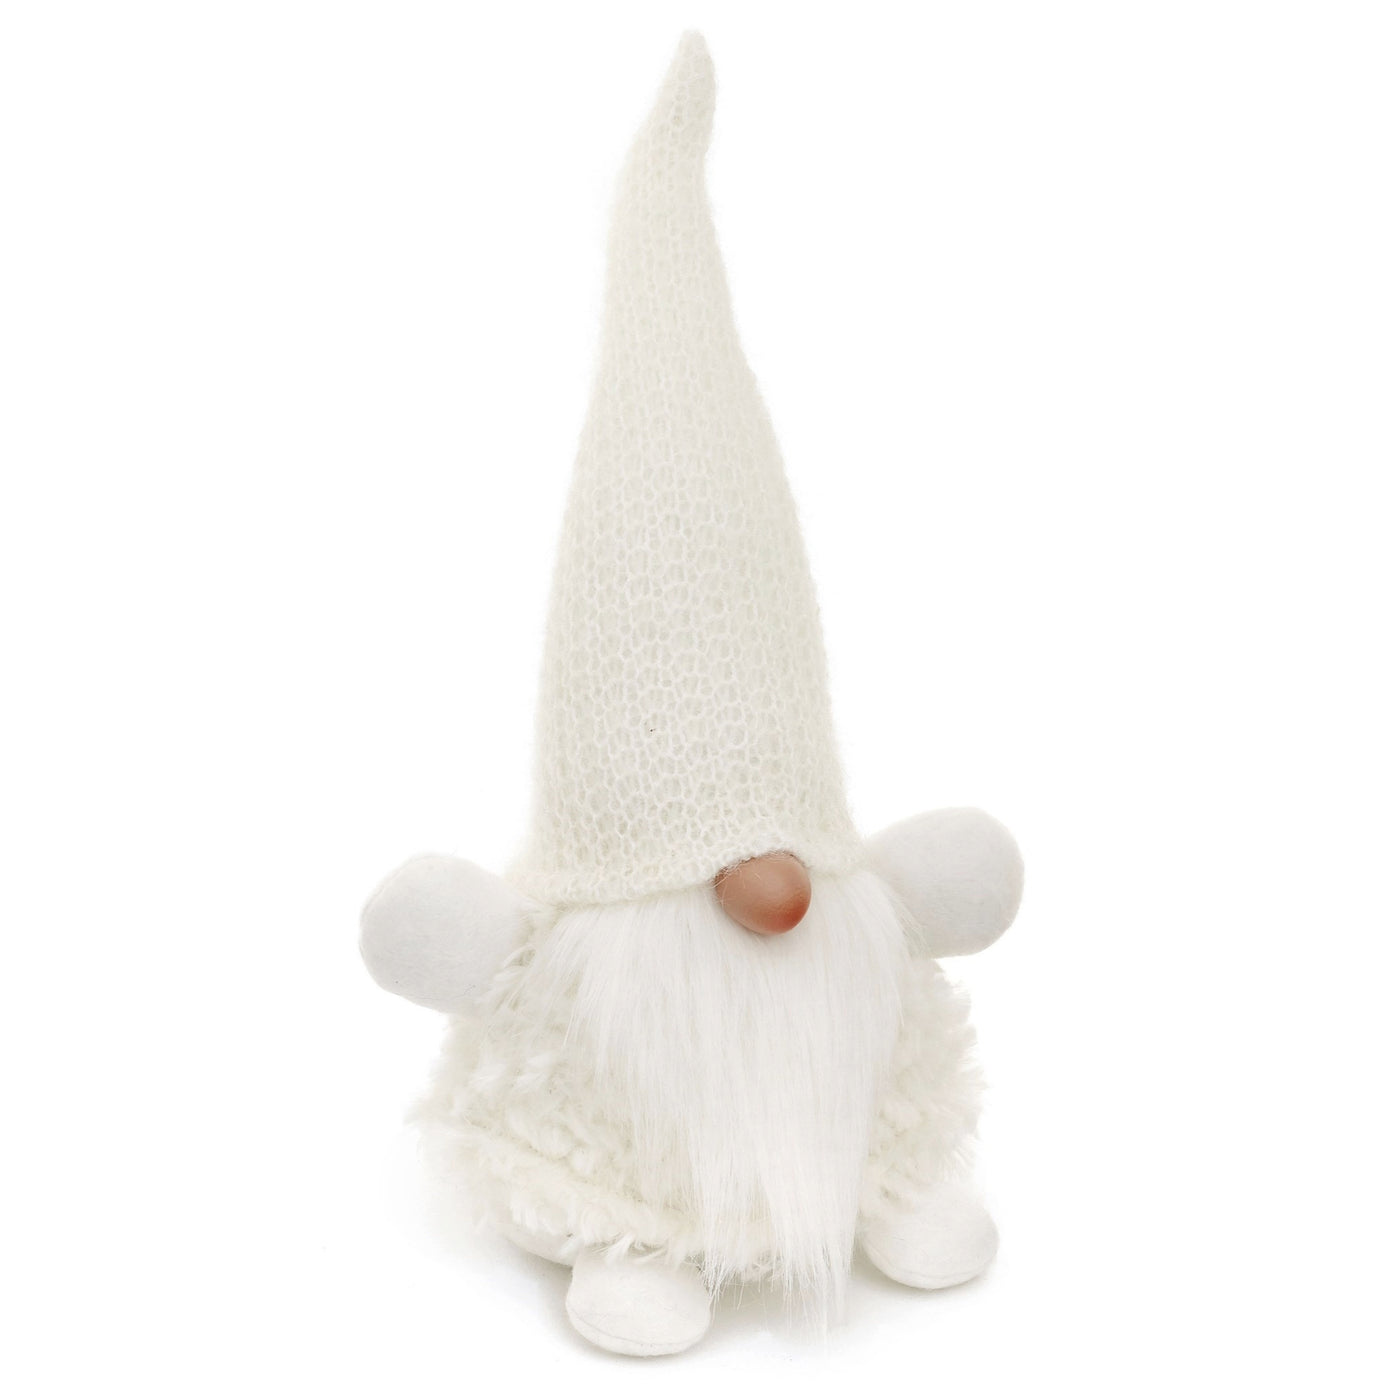 Gnome in Wool Hat: 12.5", Holiday, Santa decor, not a toy.